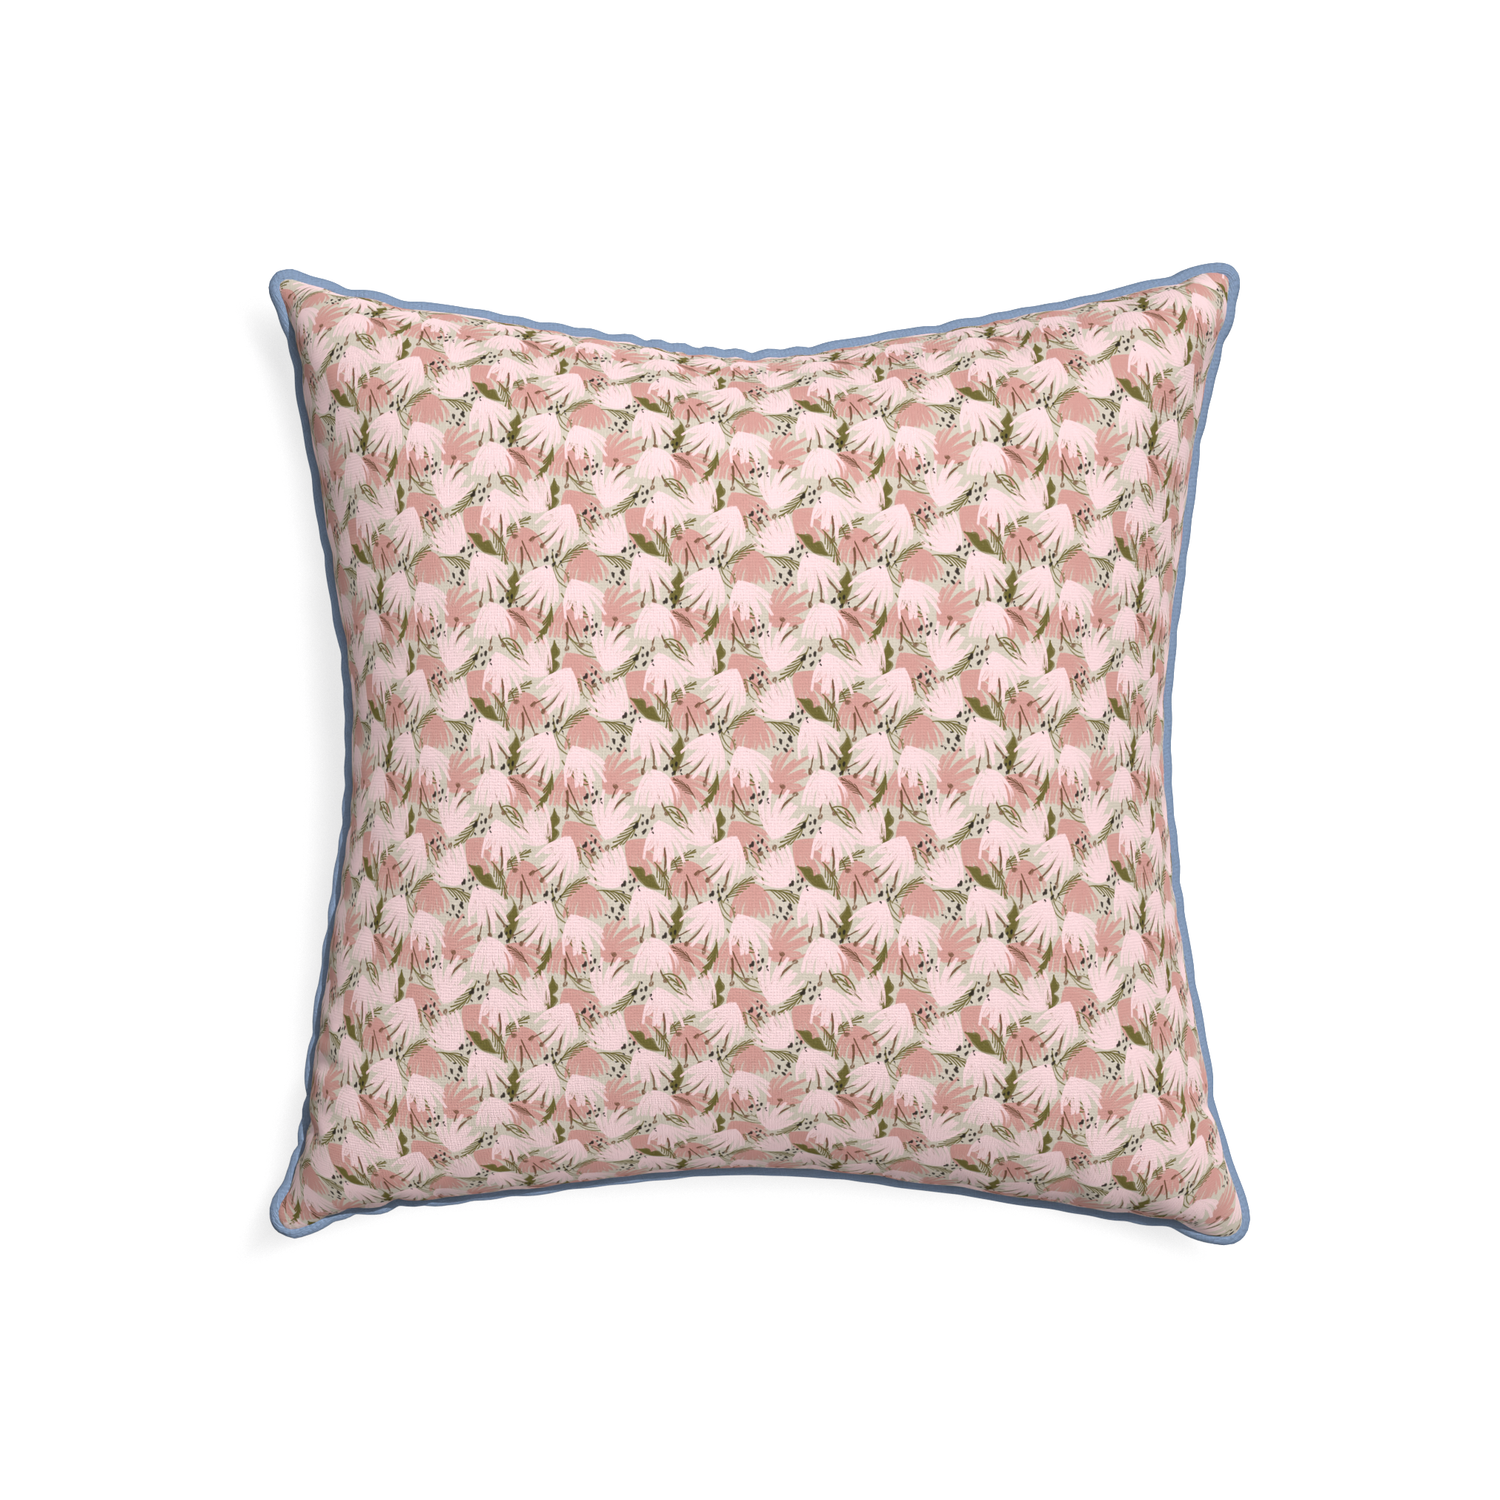 22-square eden pink custom pink floralpillow with sky piping on white background